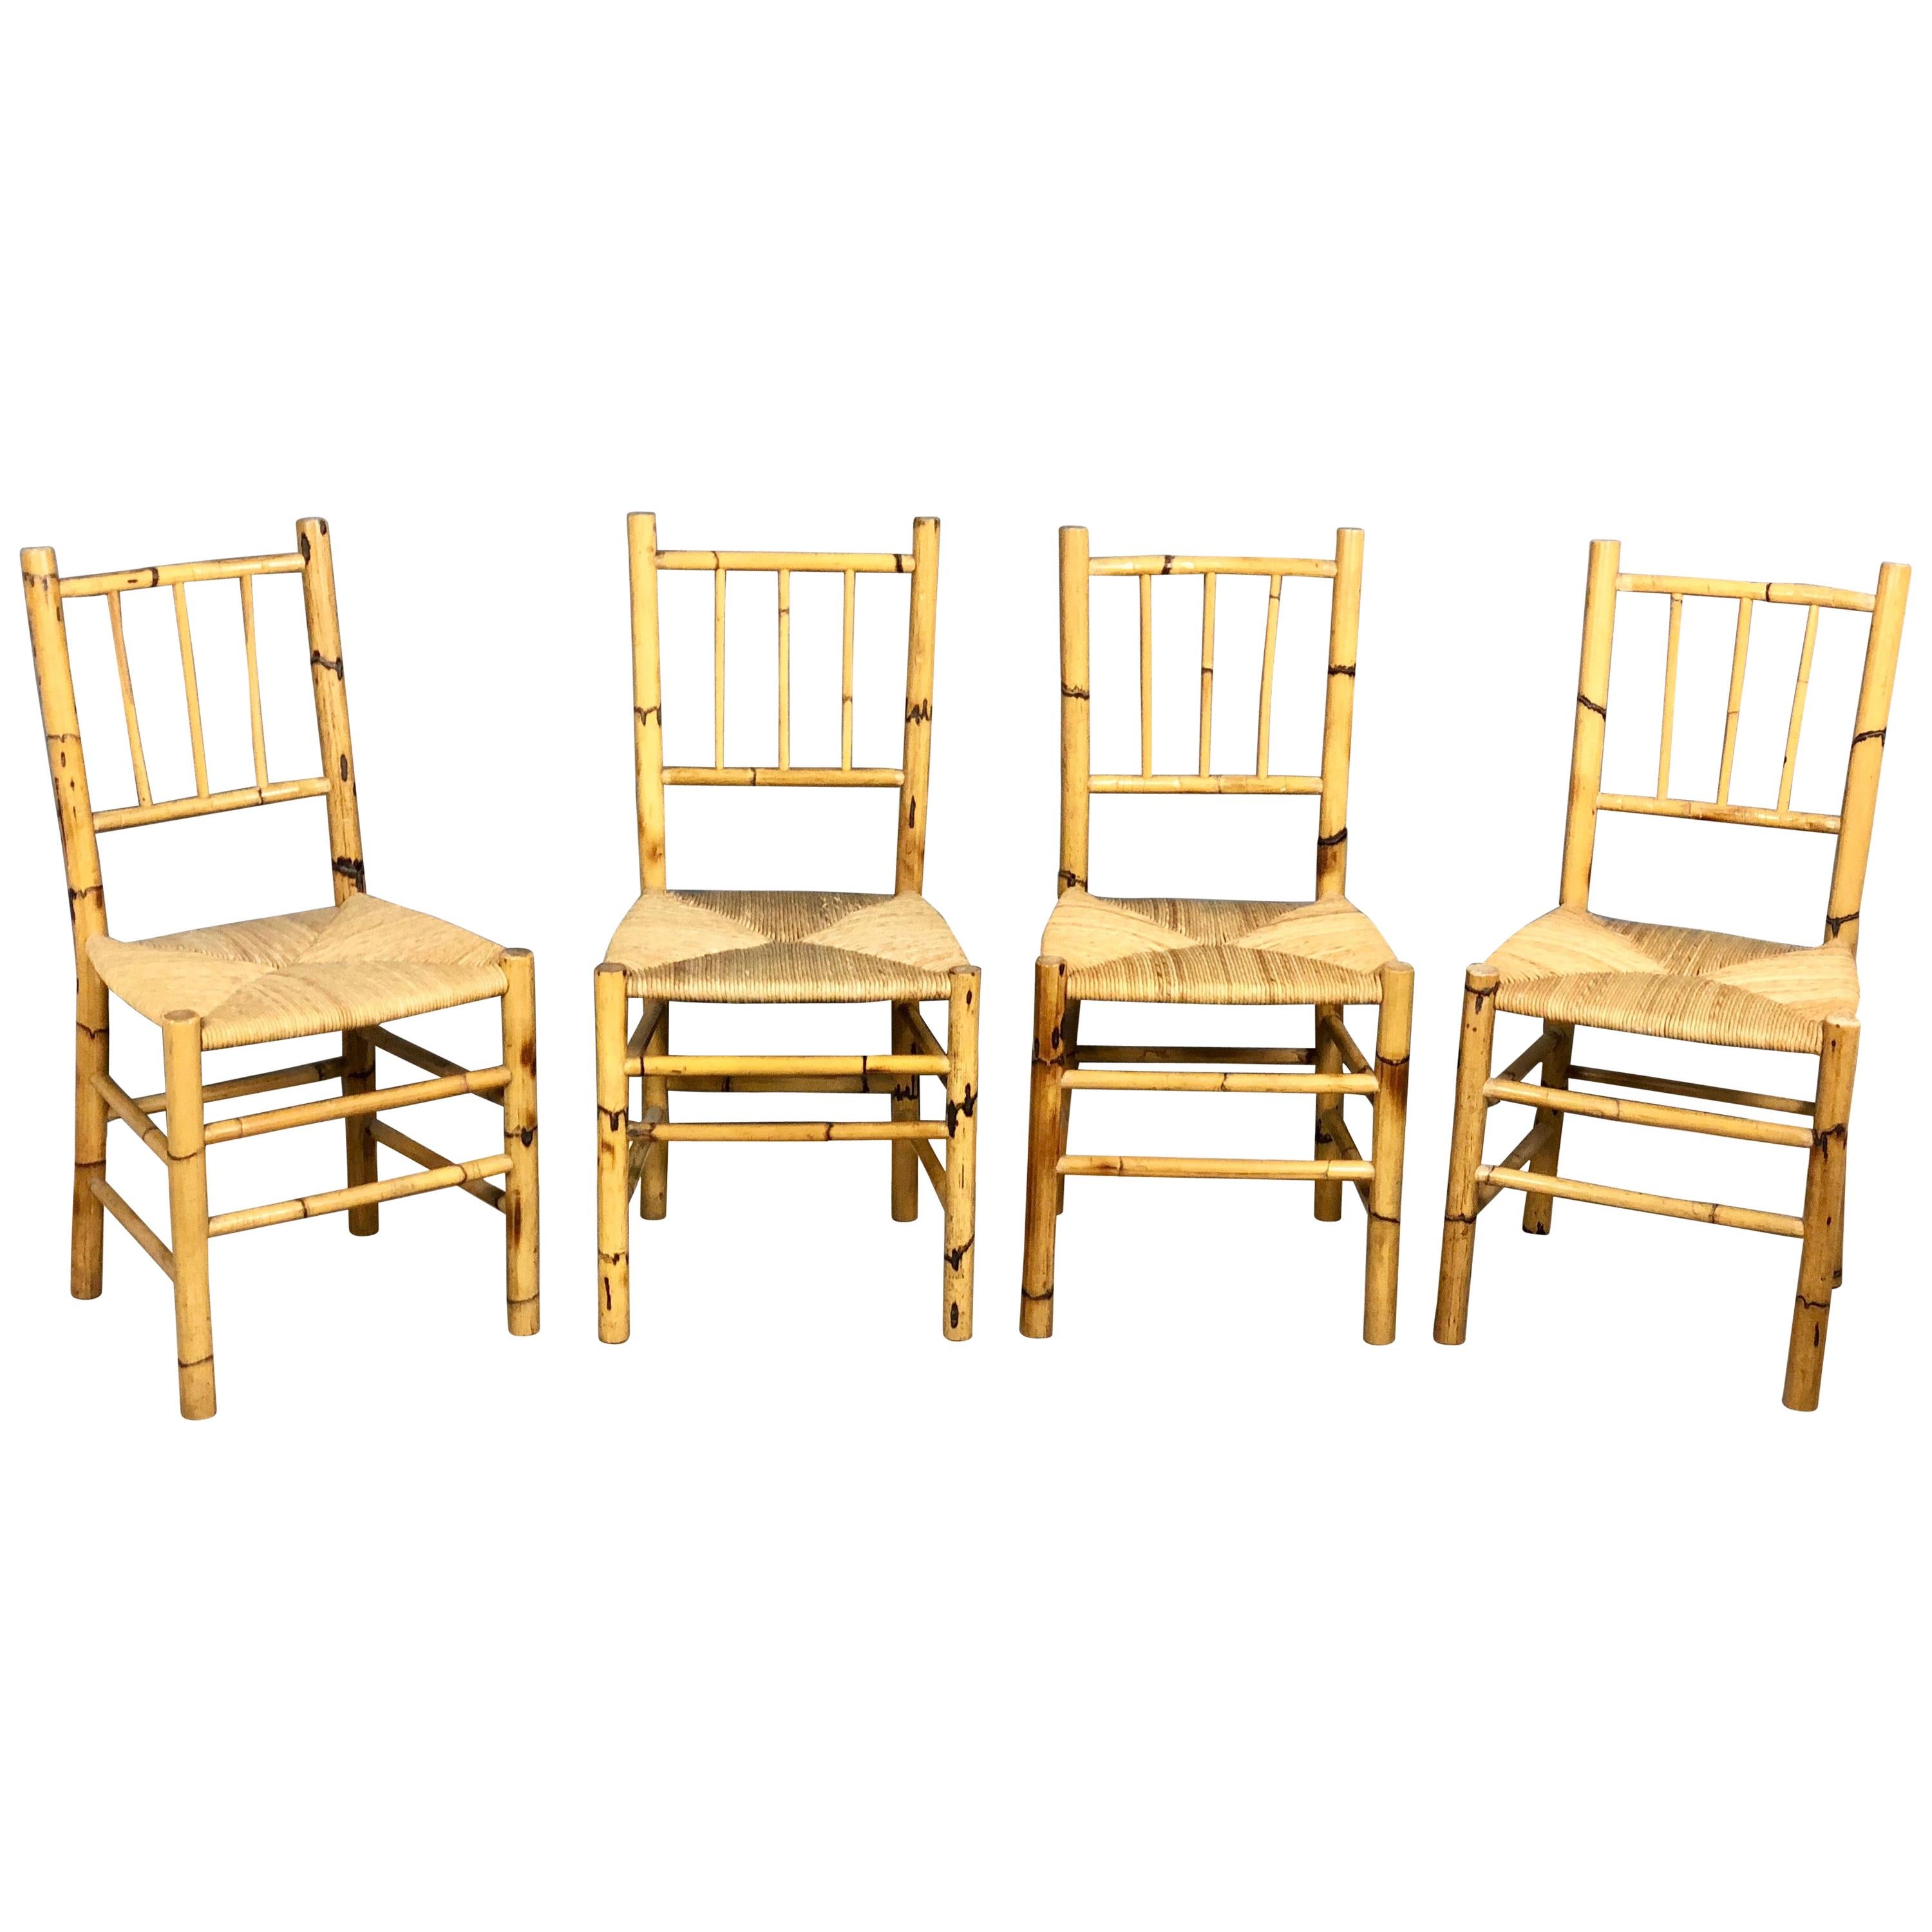 Set of Four Straw and Bamboo Vintage Chairs, Italy, 1960s